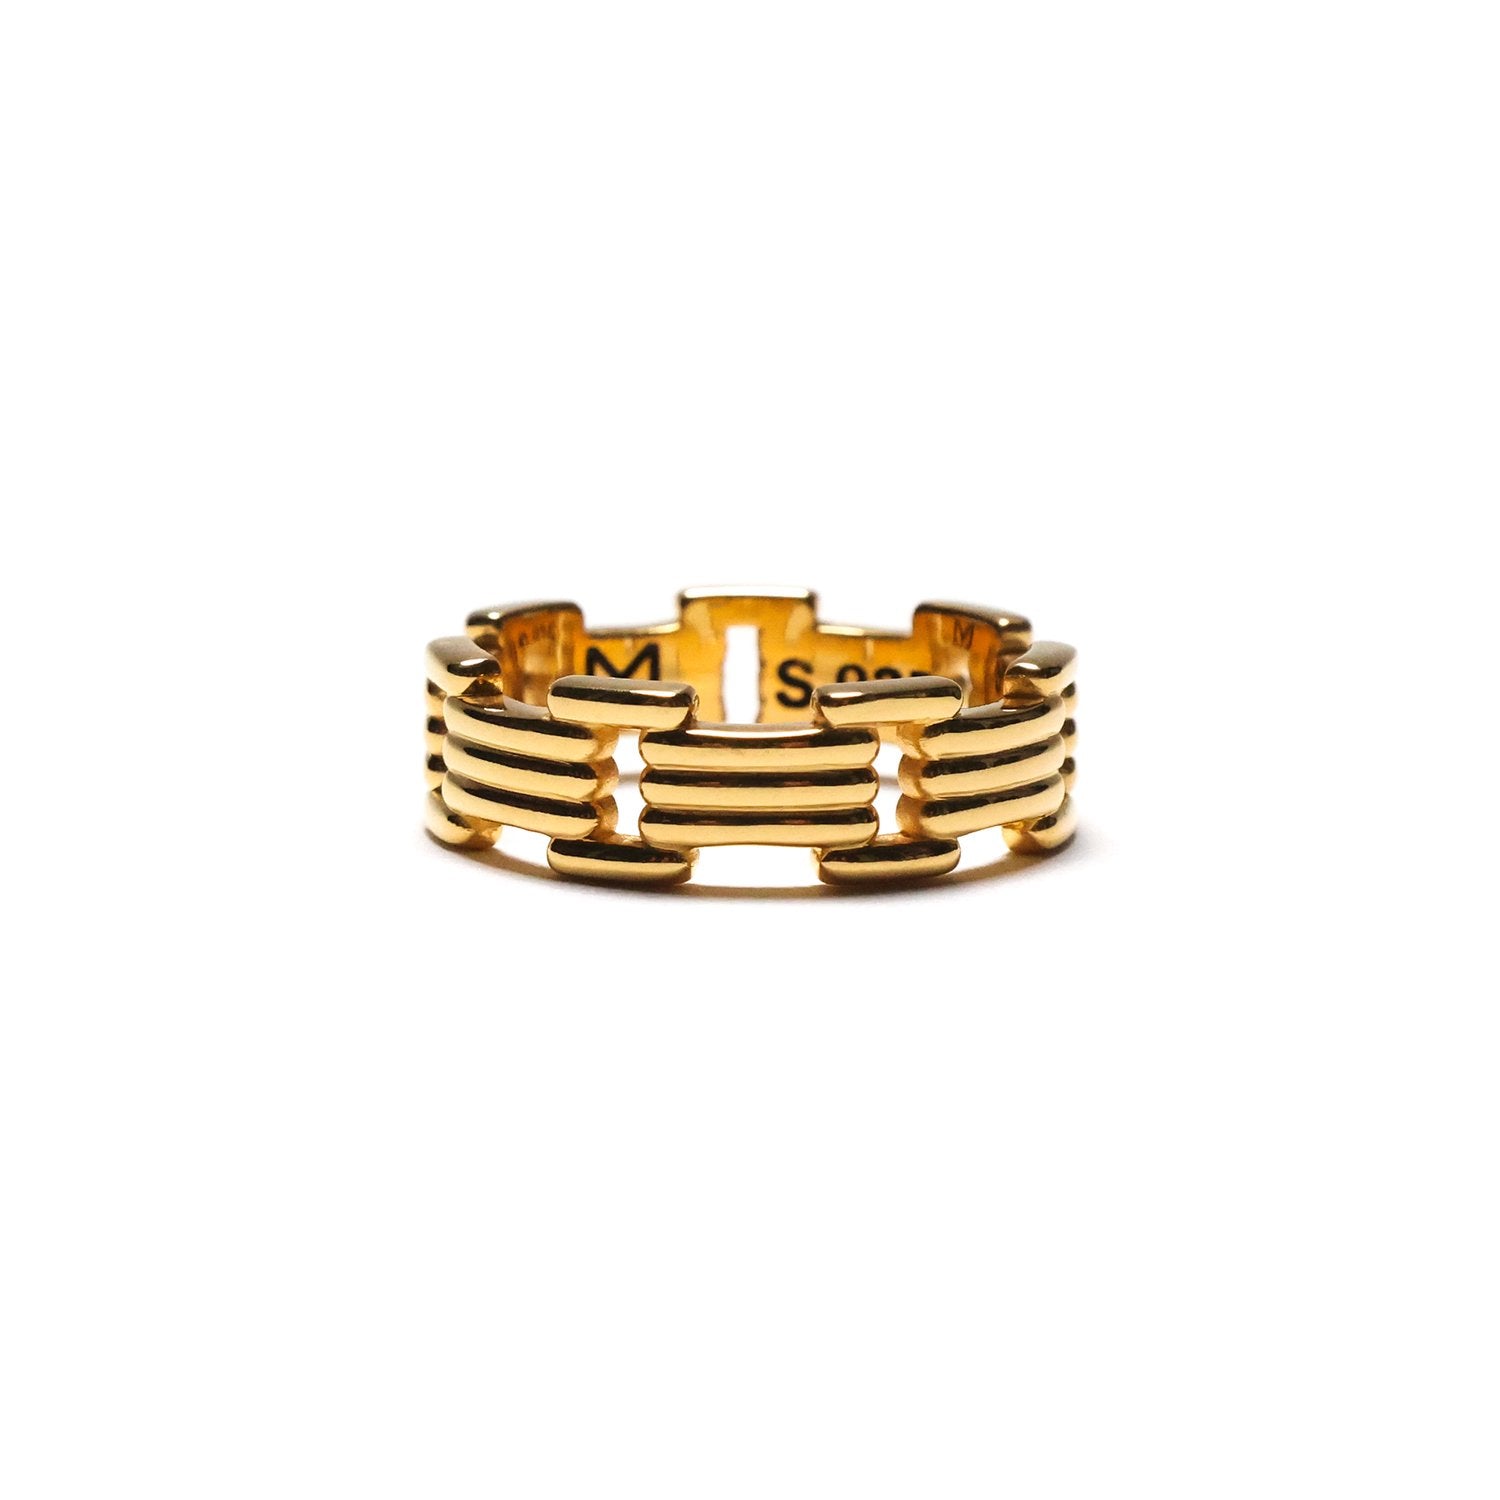 LUI LINK RING - 14K GOLD PLATE